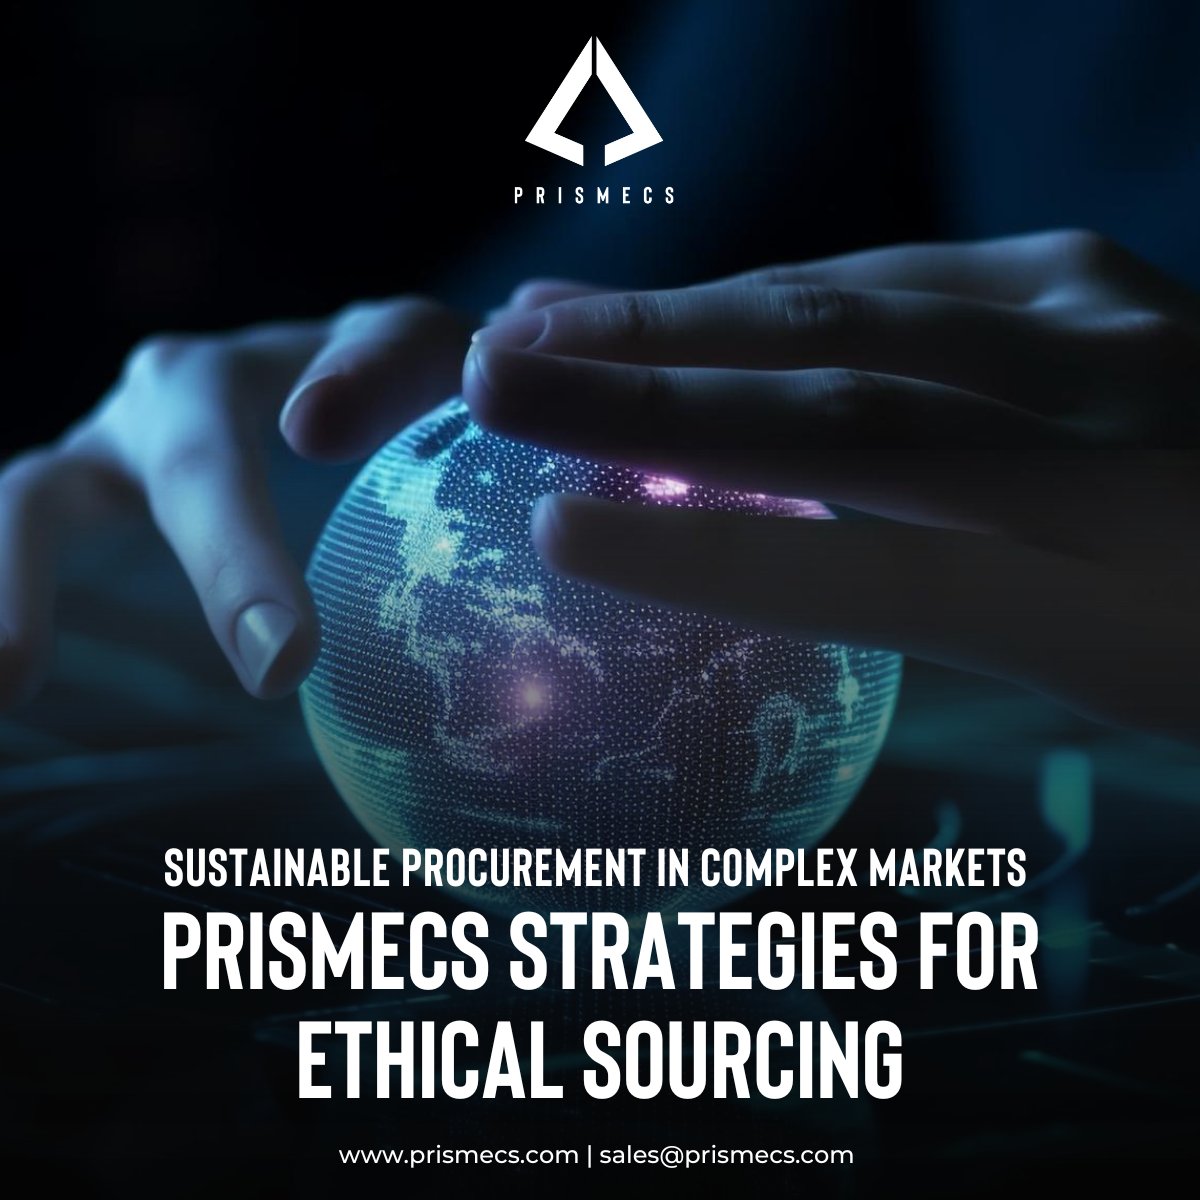 As global demand for ethical practices grows, Prismecs sets the standard for sustainability and operational excellence. Partner with us for sustainable procurement and stay tuned for the launch of our platform, eIndustrify! 
#prismecs #eindustrify #Procurement #Sustainability